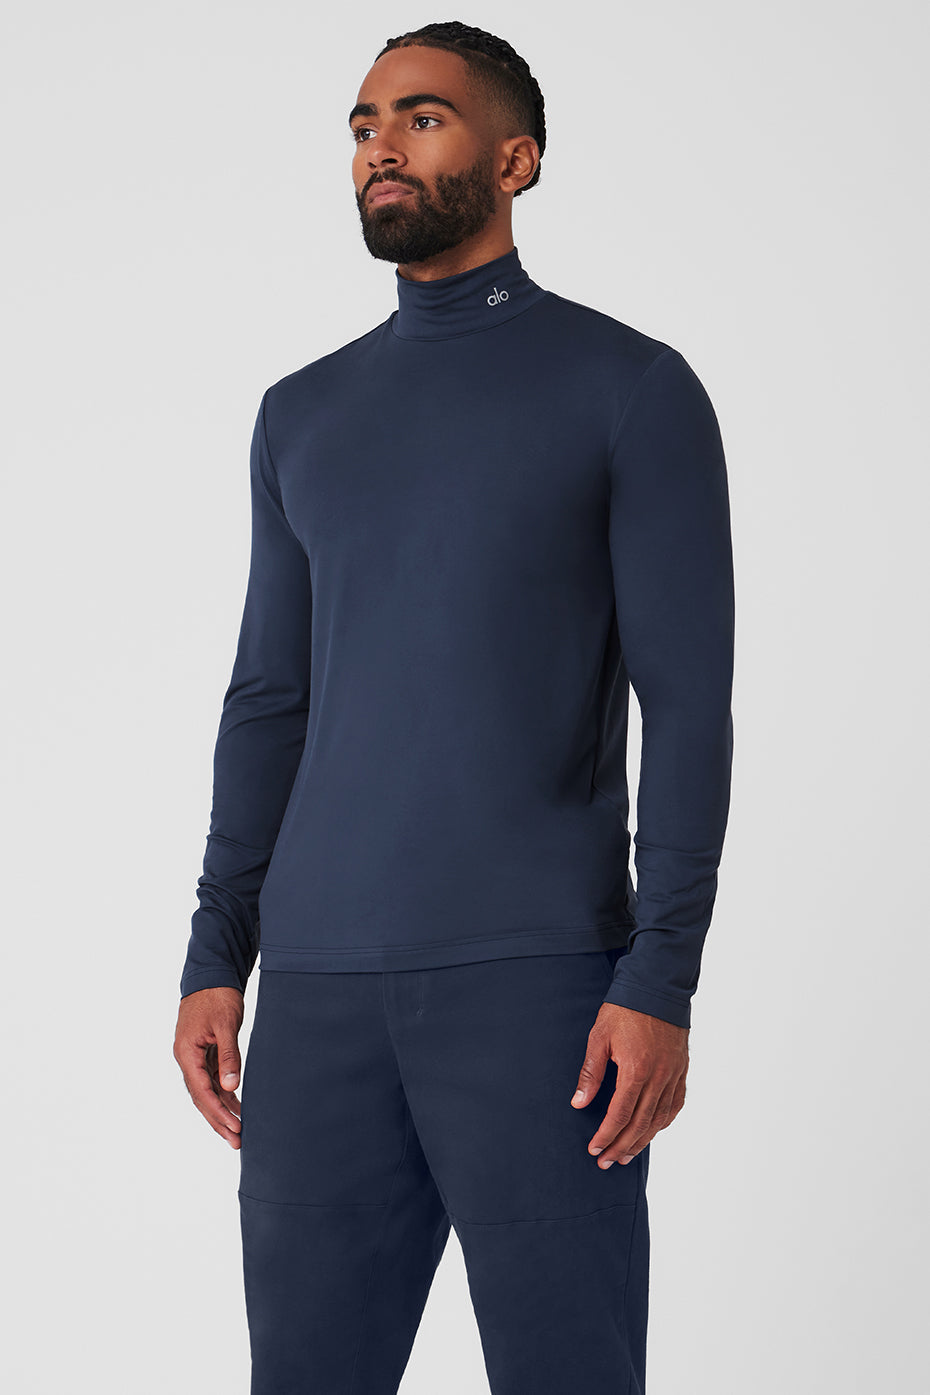 Conquer Reform Mock Neck Long Sleeve - Navy